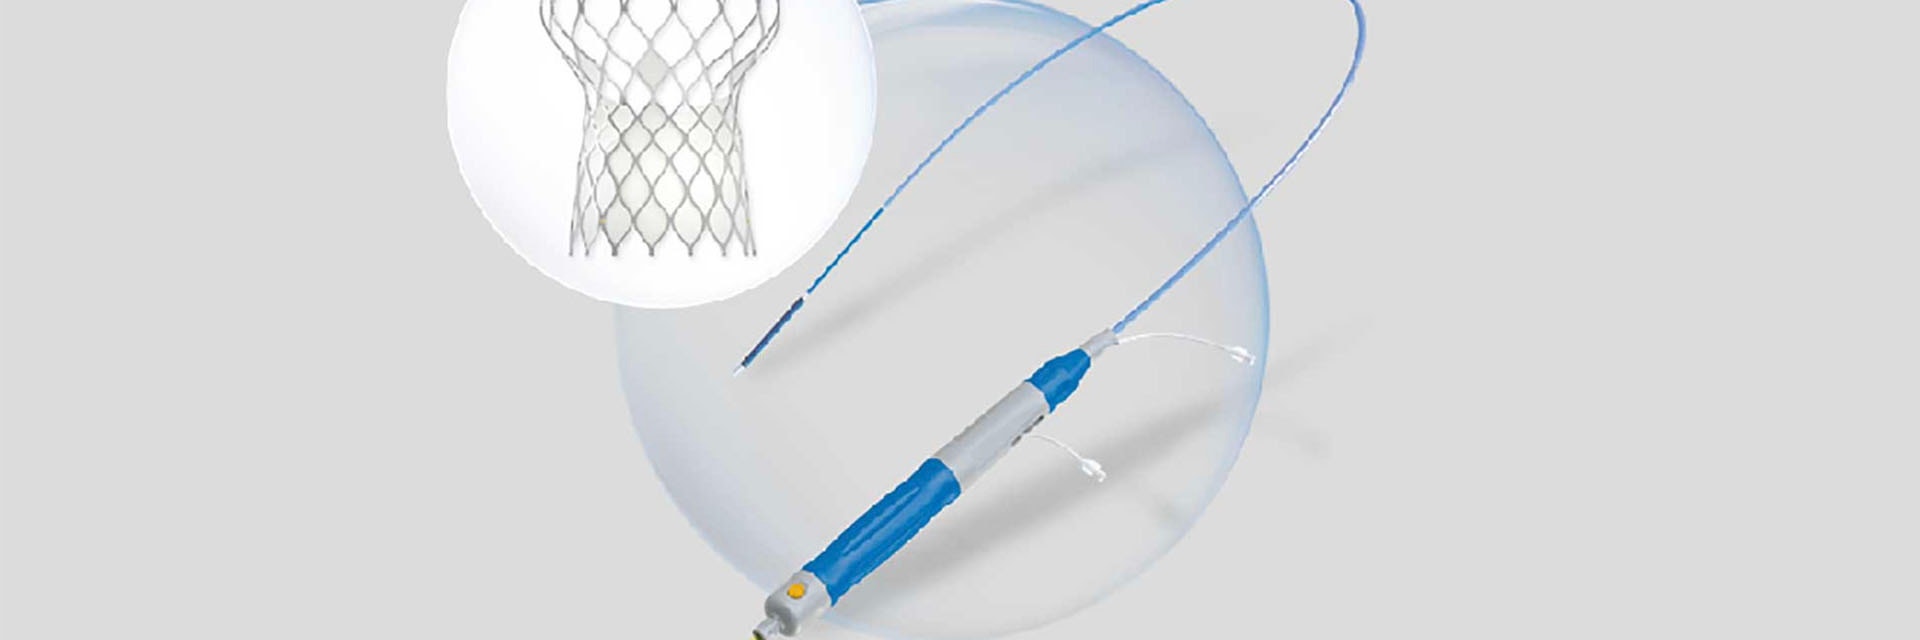 Digital image of tools for structural heart procedures